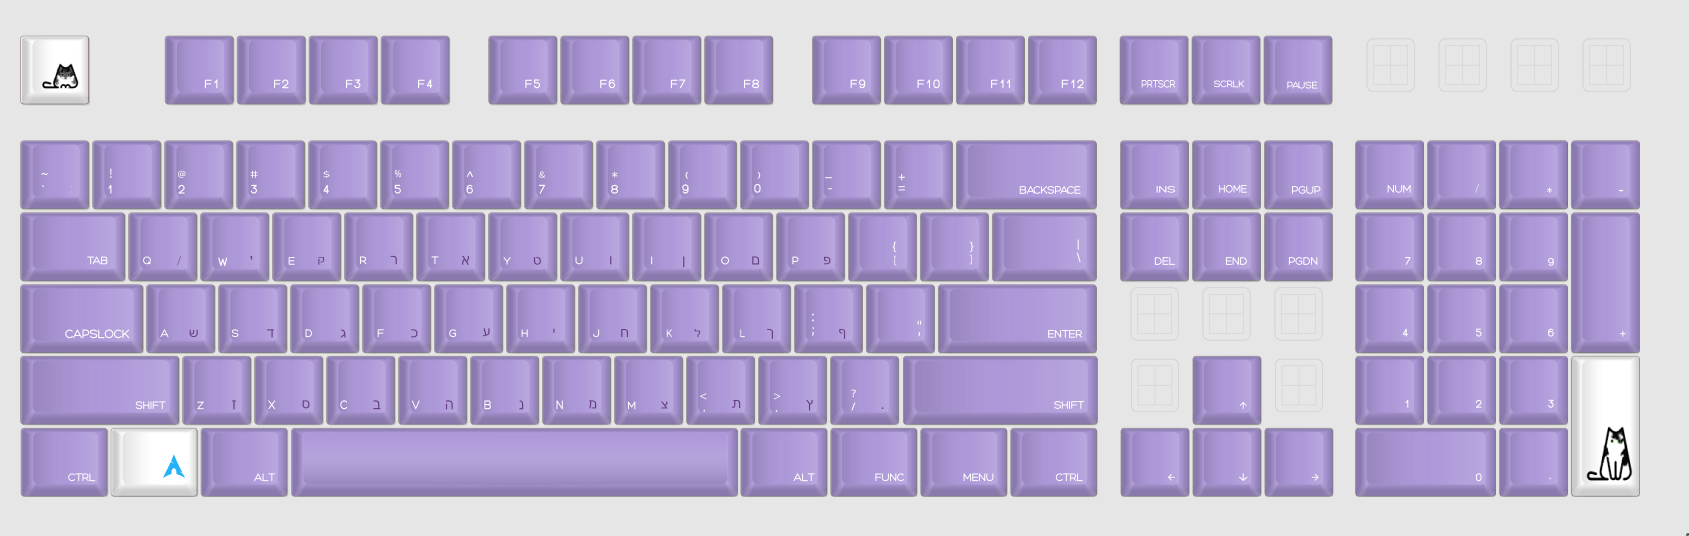 A keyboard with mostly light purple keys, except the escape, Win, and enter on the number pad, which are white. The escape has a small cat with tabby stripes and white, and the enter key has a larger cat with white and black spots. The Win key has the blue Arch Linux logo on it. All the letter keys have white Roman letters and dark purple Hebrew letters.